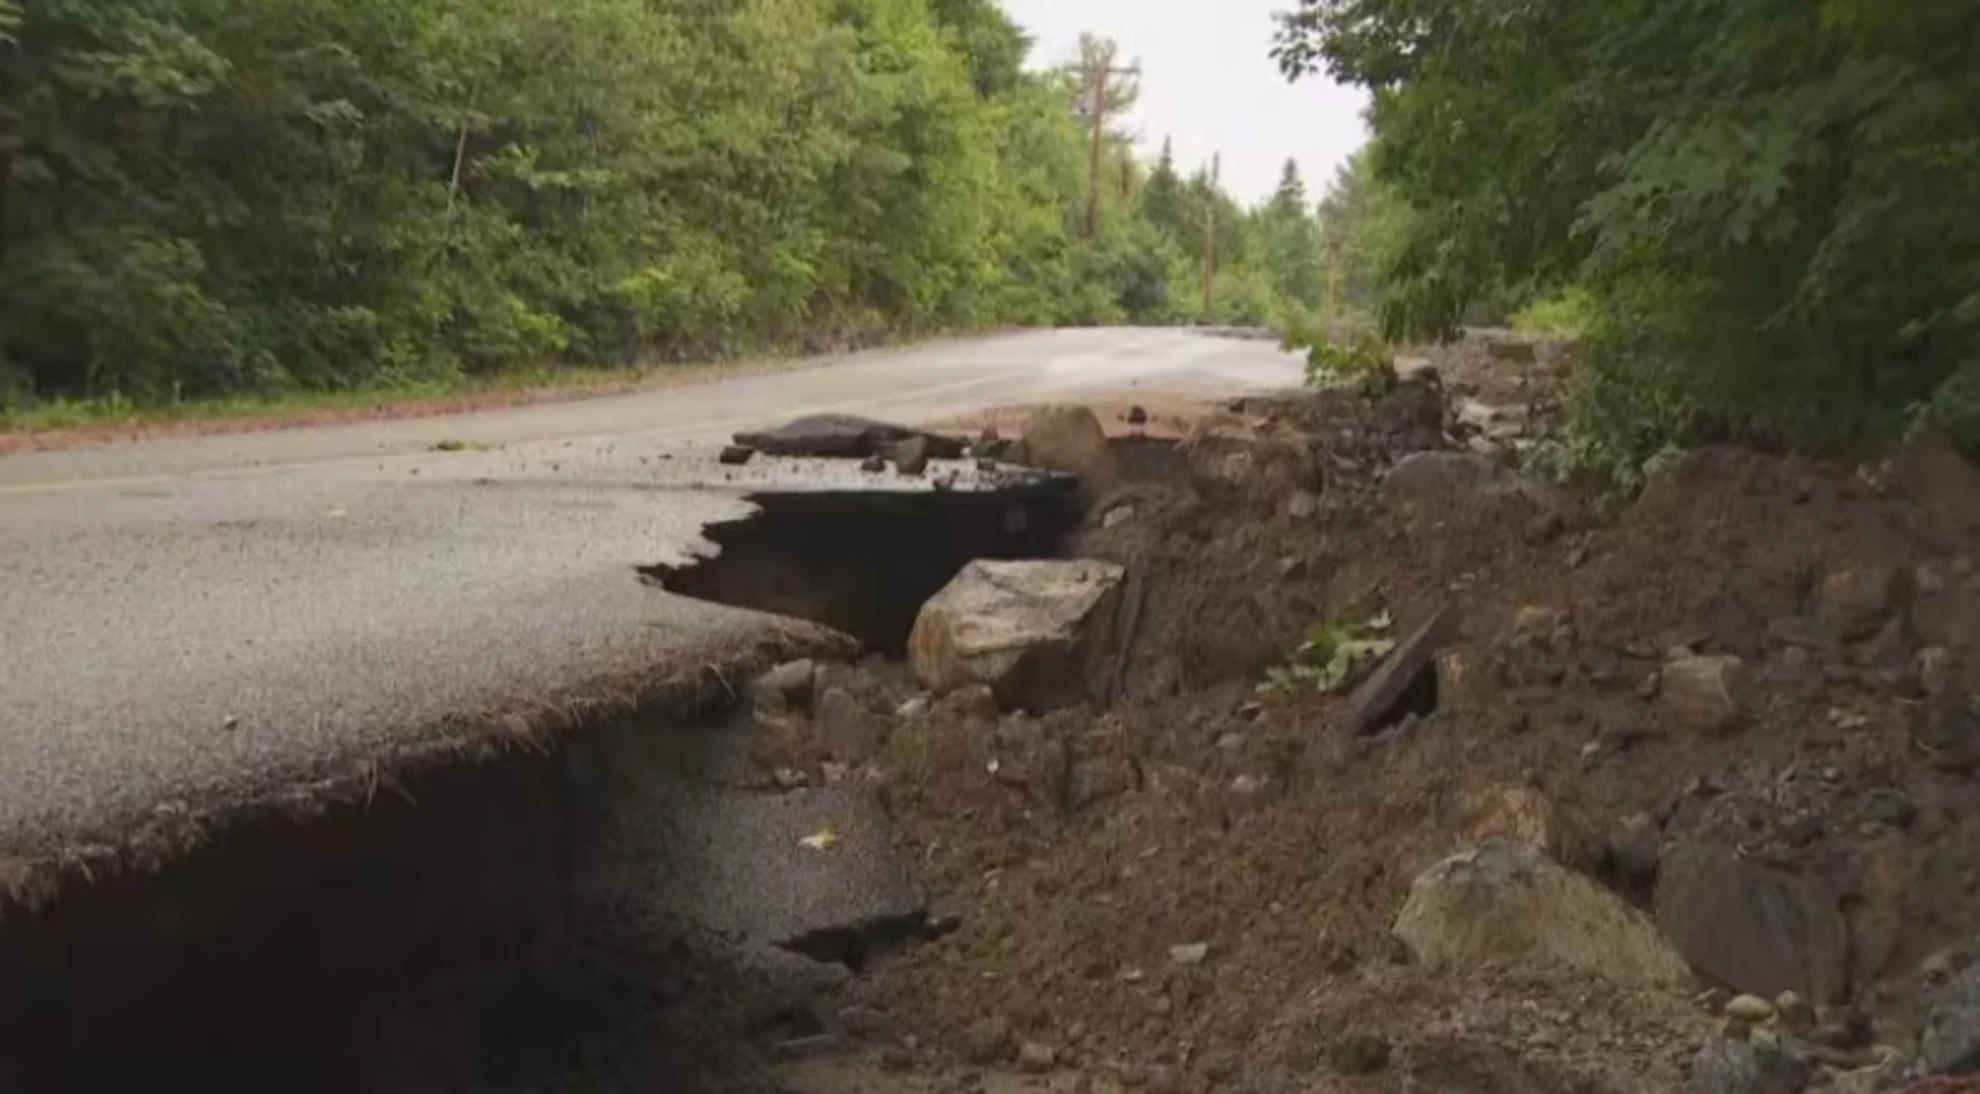 The situation is being closely monitored: Torrential rain damages small dam, floods roads in parts of Quebec. Residents asked to limit travel in THIS area